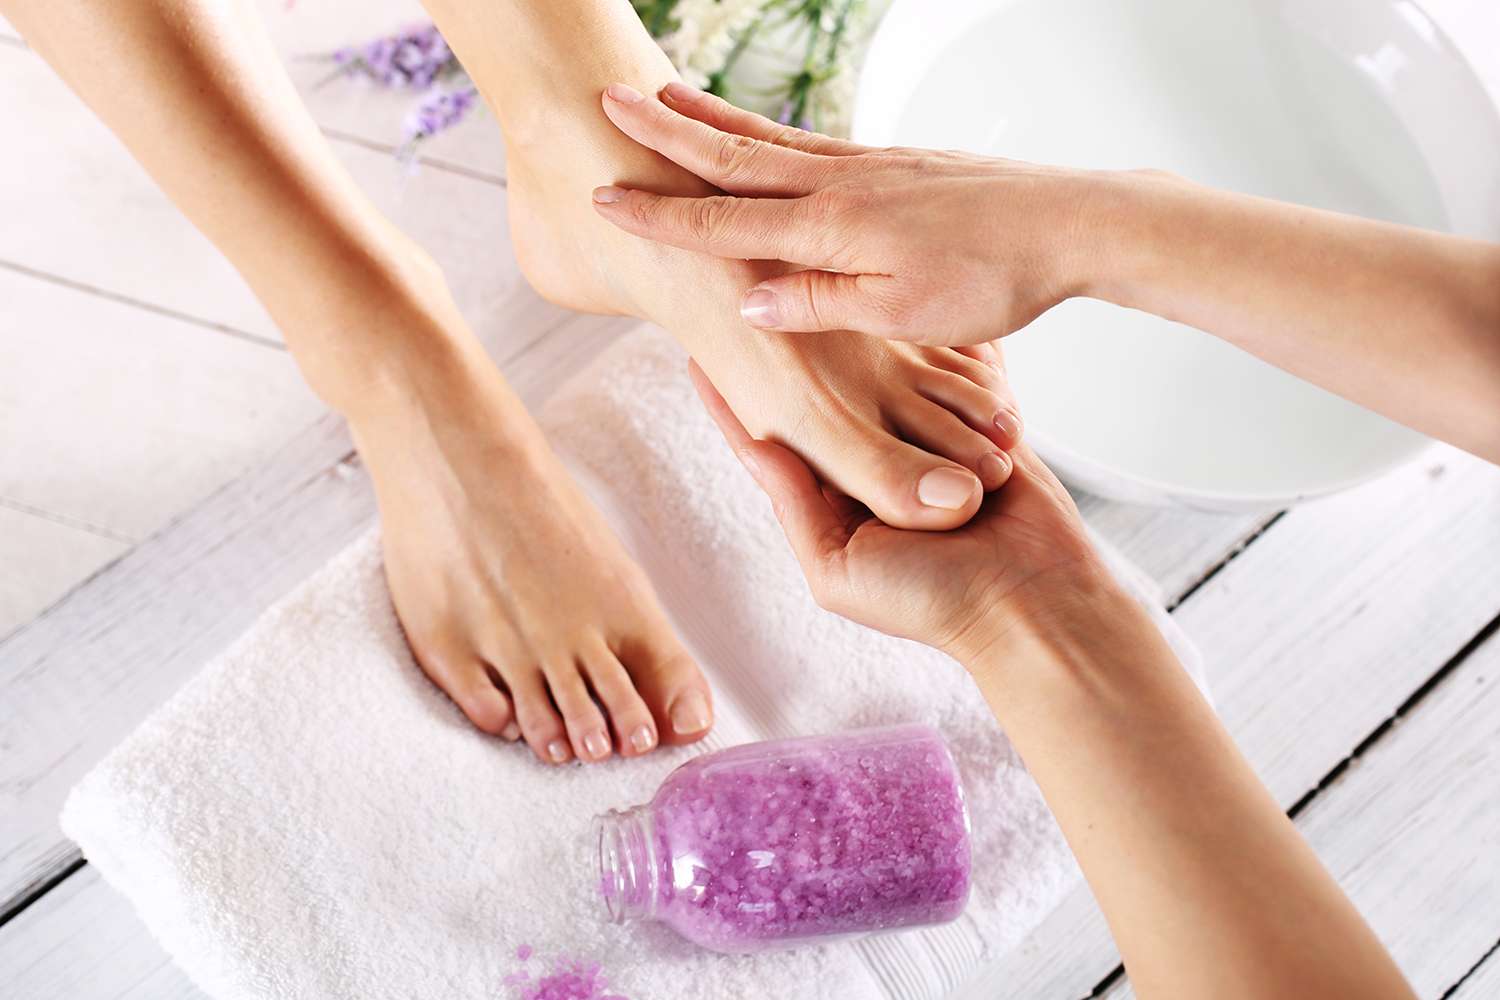 What is Reflexology Foot Massage and Where Are the Best Near Me?